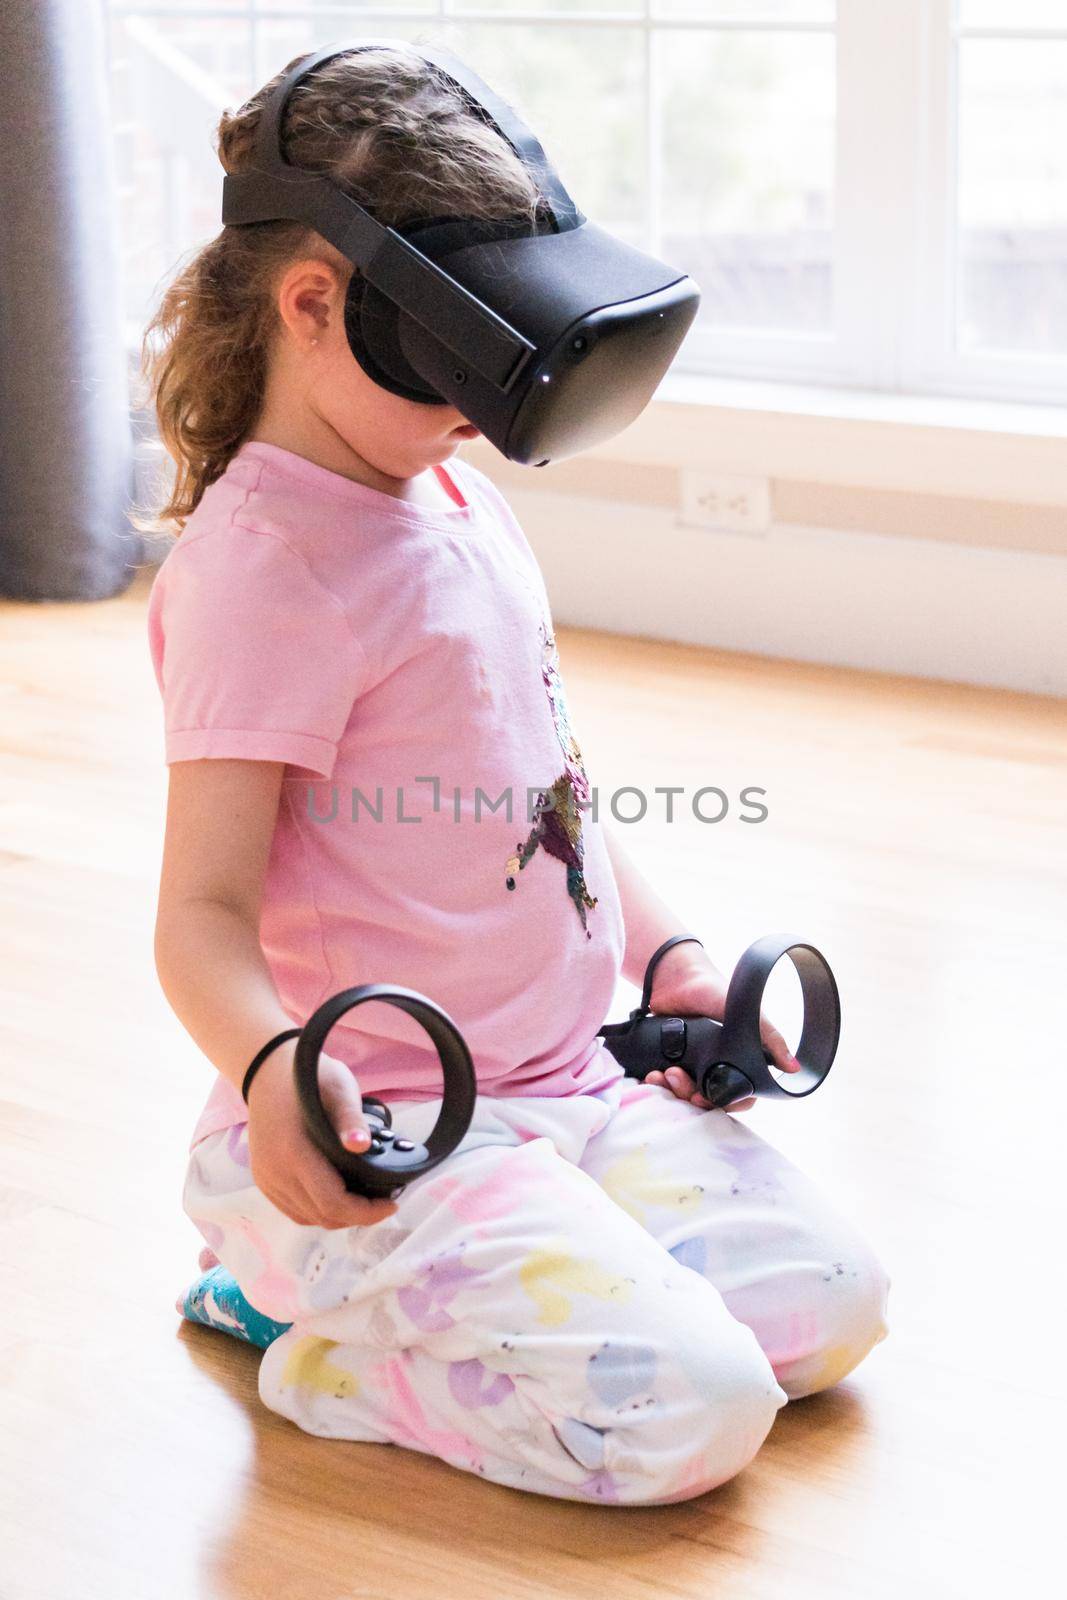 Little girl playing virtual reality game in the living room,